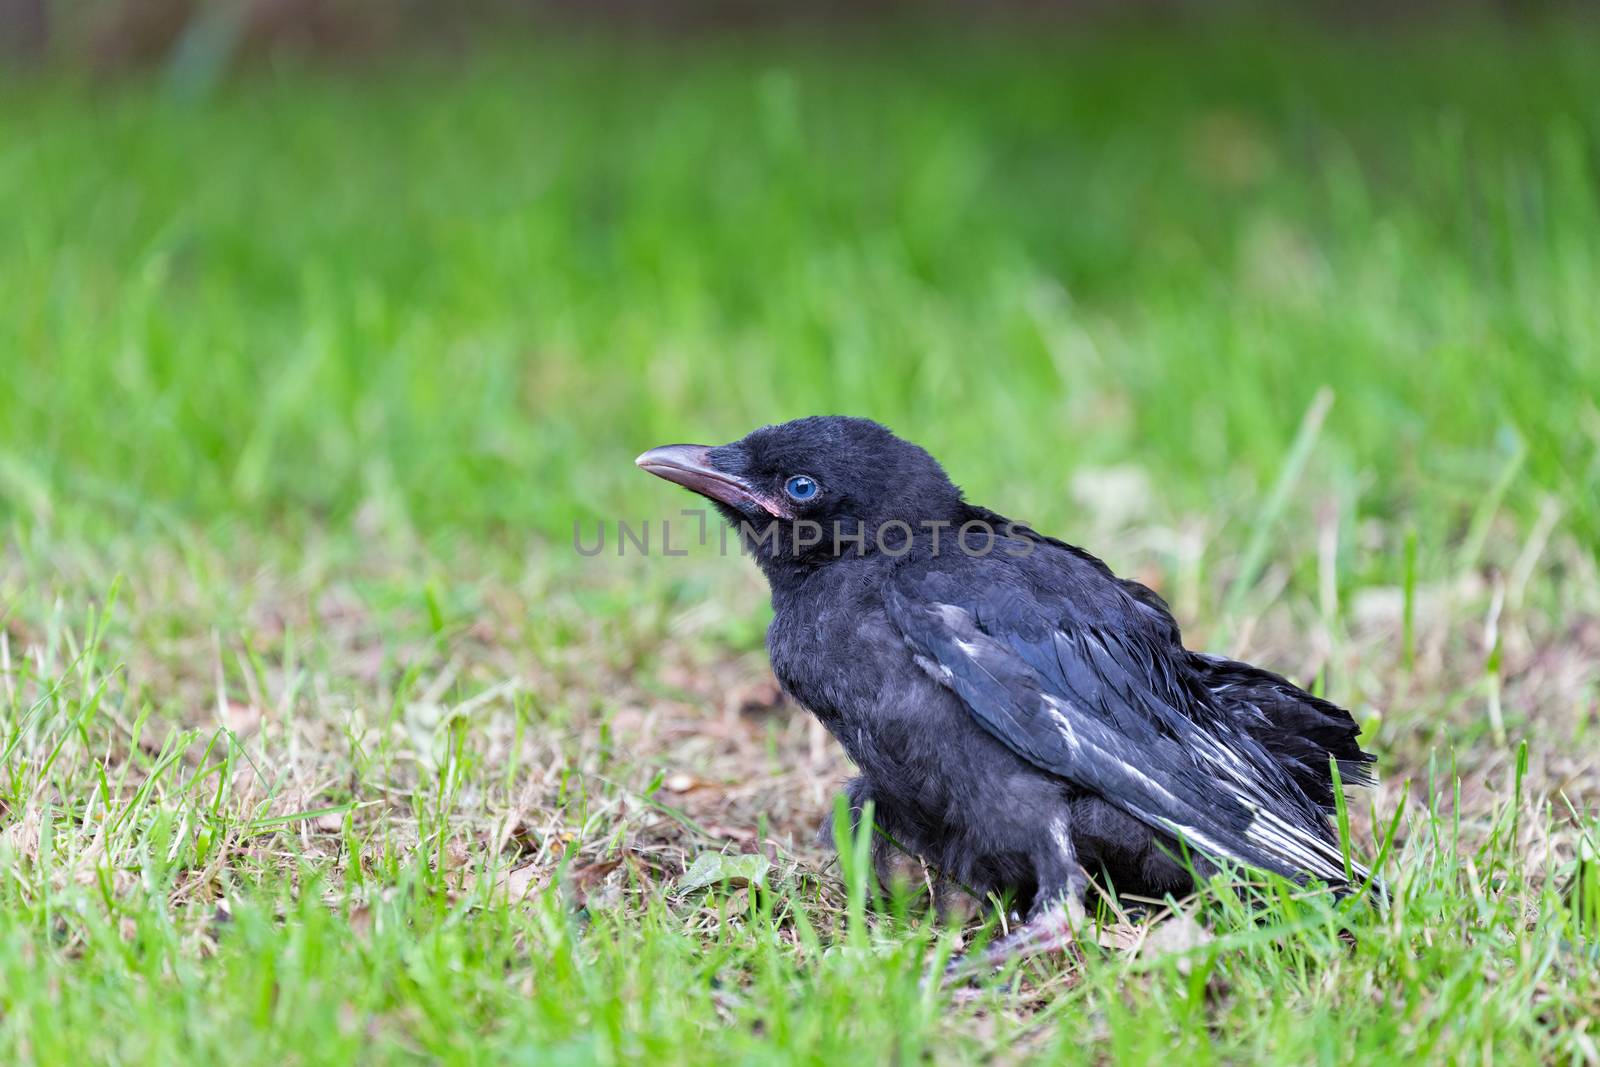 Young black crow sitting in green grass in summer season